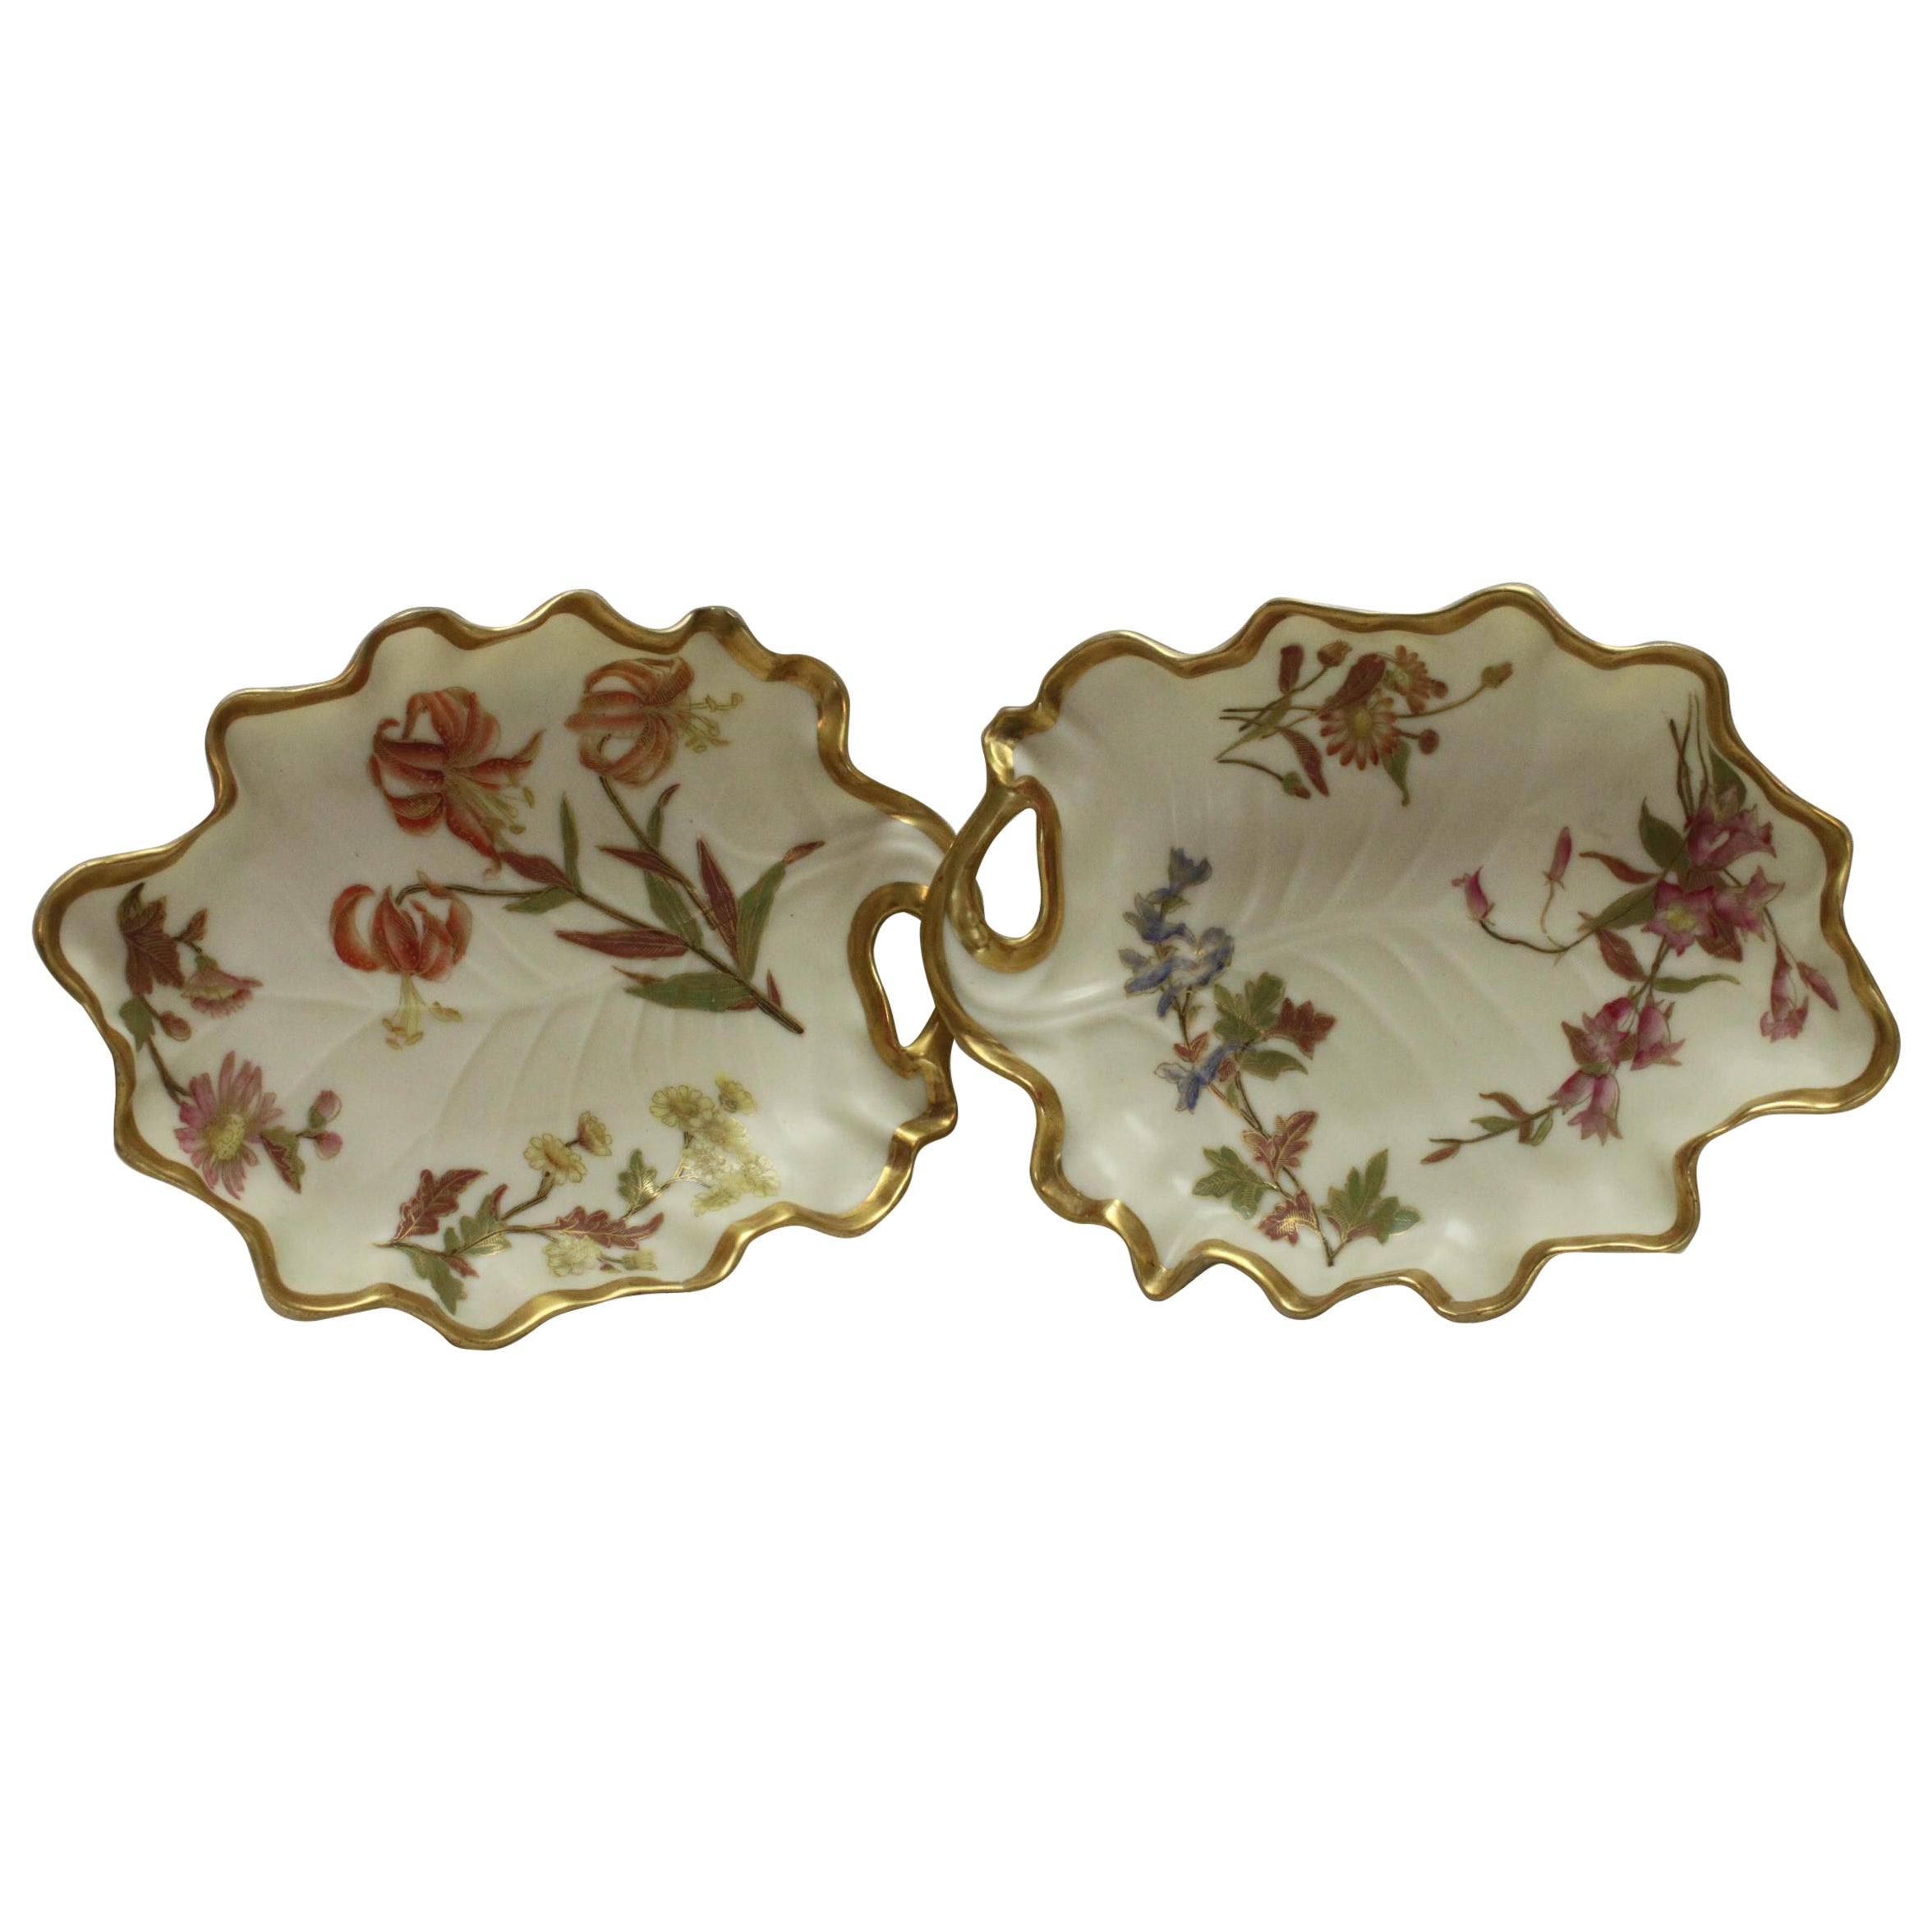 Two Royal Worcester Blush Ivory dishes in the shape of a cabbage leaf